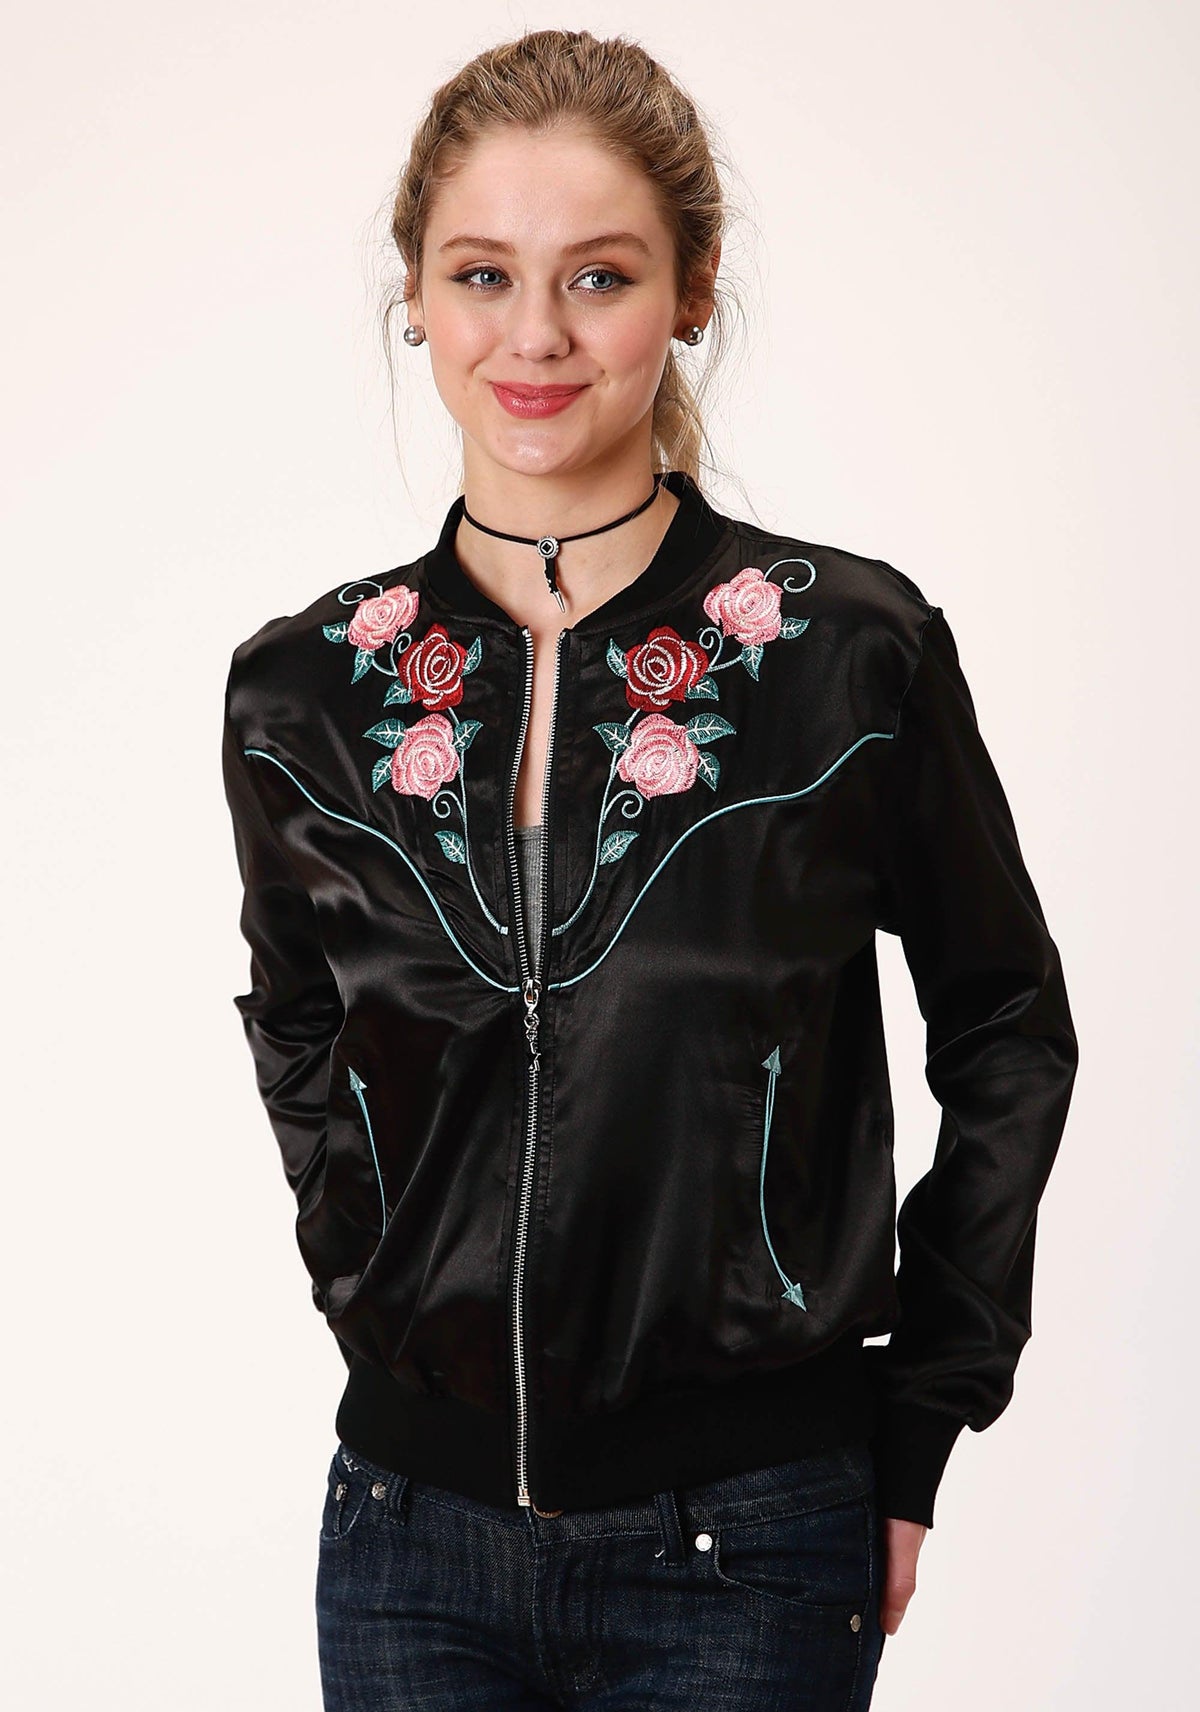 ROPER WOMENS BLACK WITH FLORAL EMBROIDERY ZIP FRONT JACKET - Flyclothing LLC